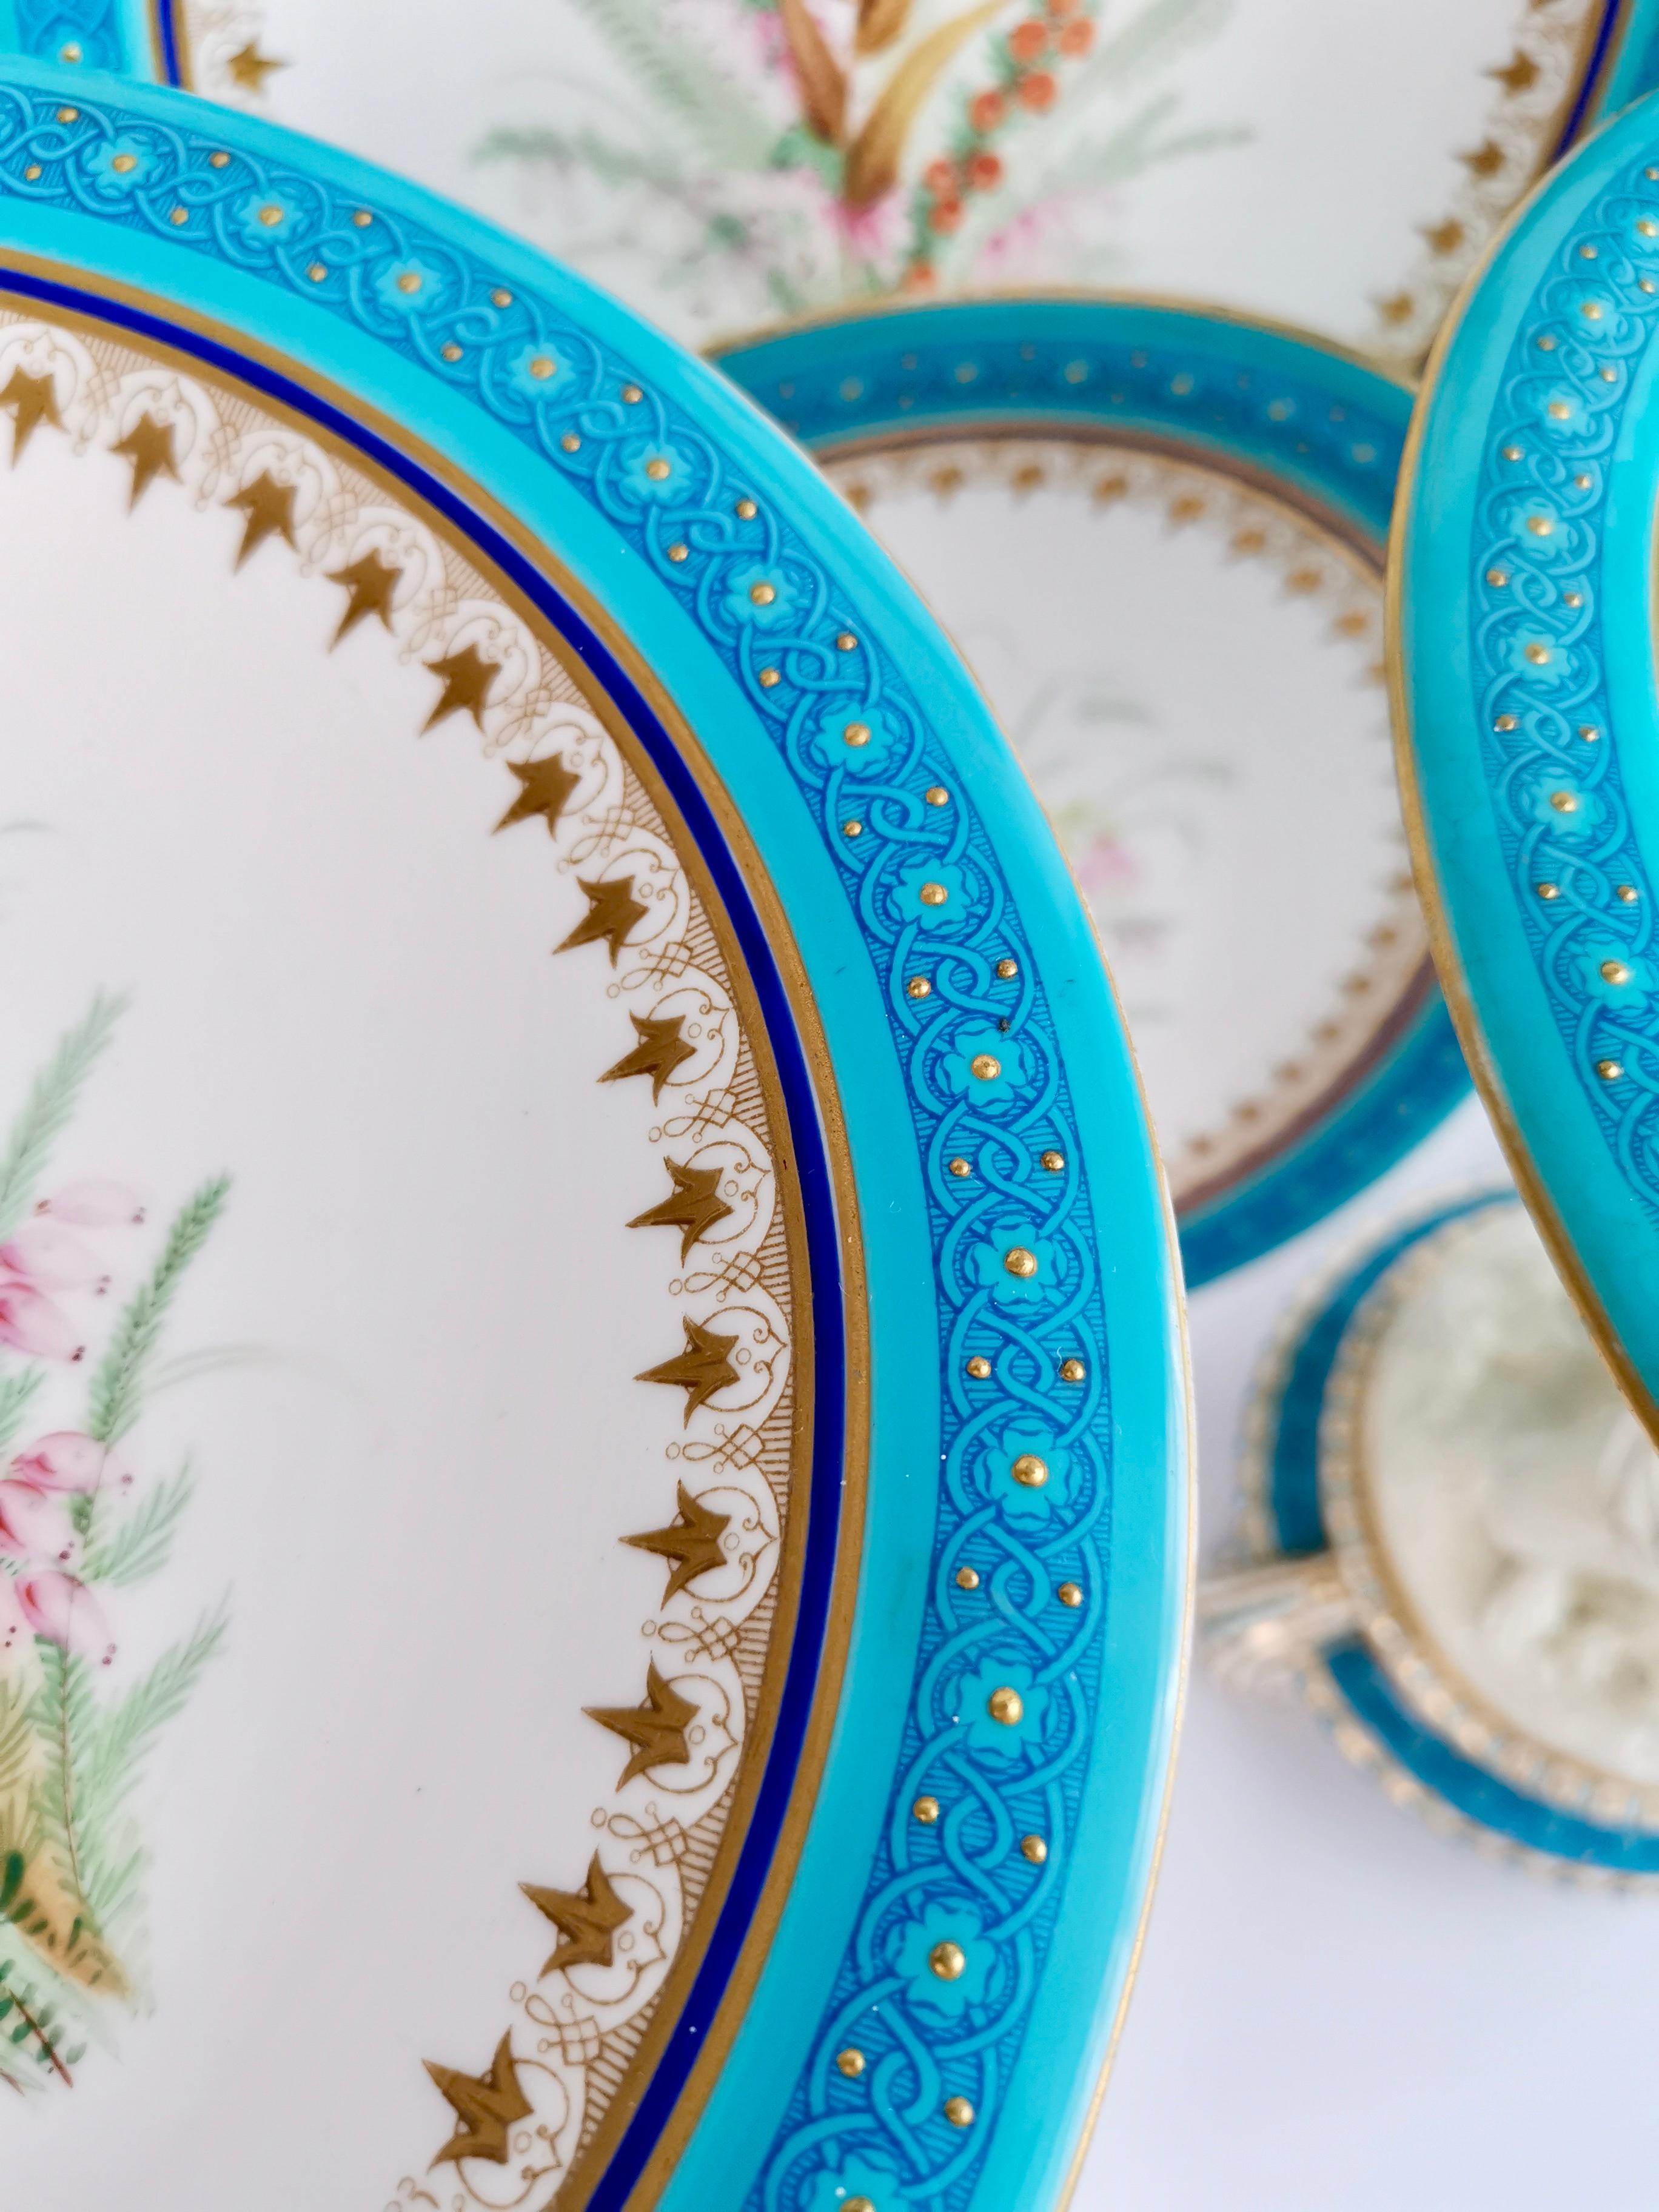 Royal Worcester Porcelain Dessert Service, Turquoise with Parian Cherubs, 1910 1